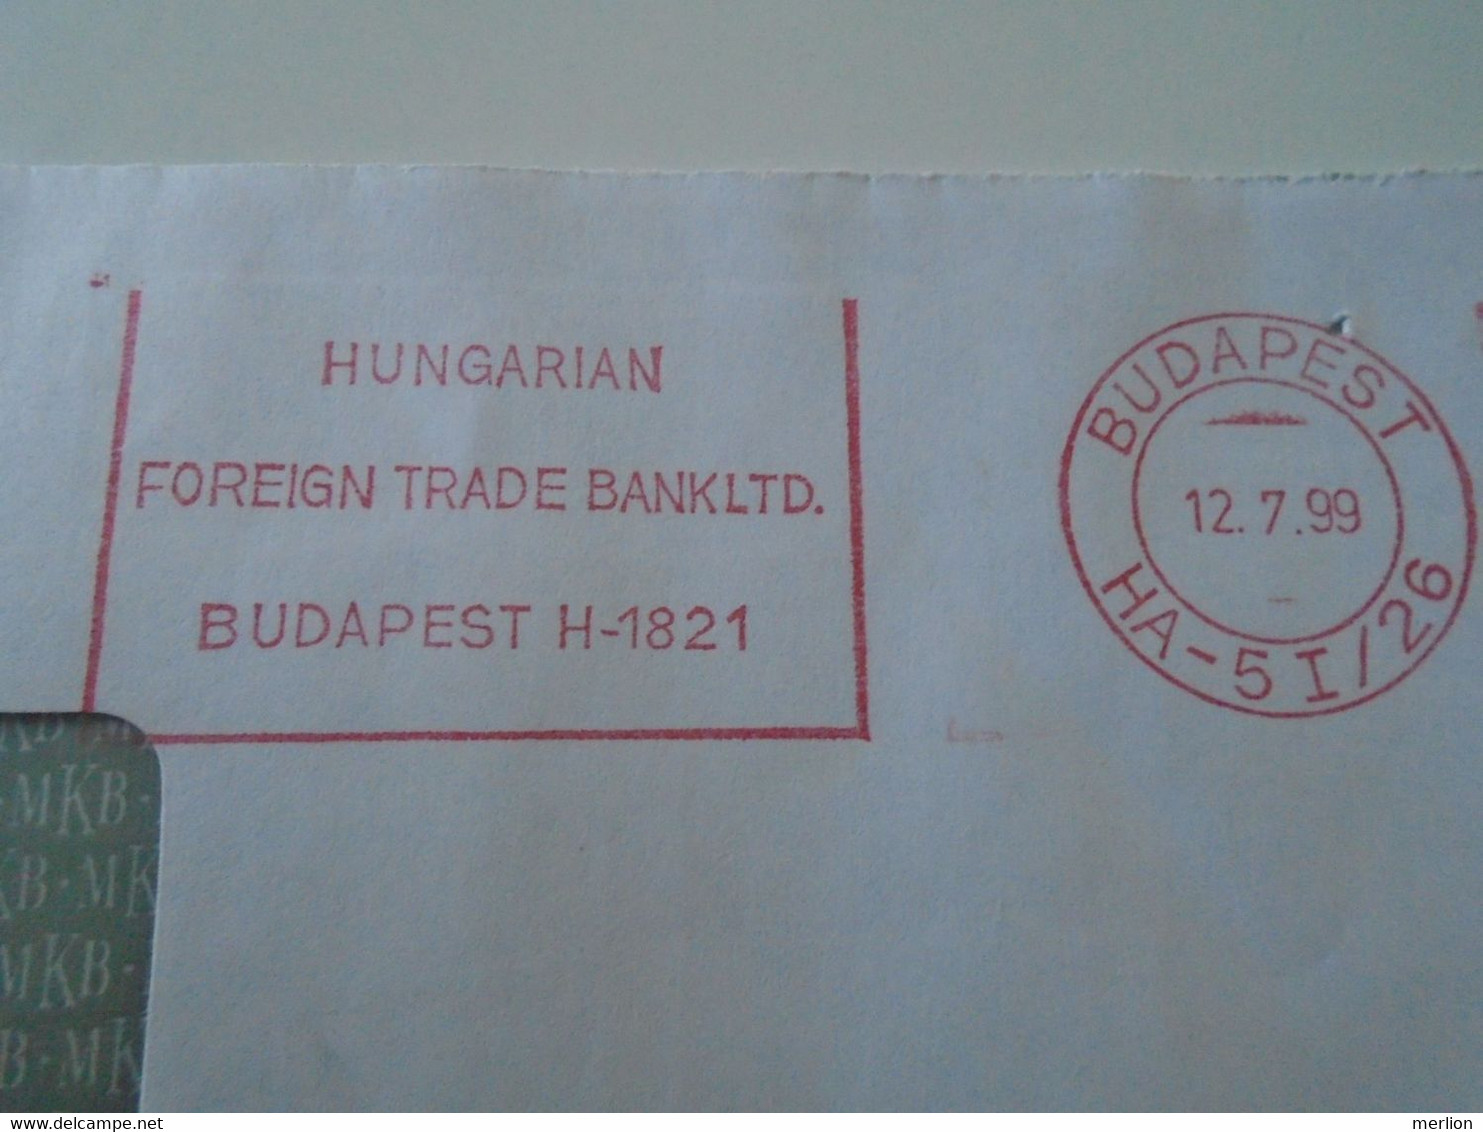 AD00012.119  Hungary Cover  -EMA Red Meter Freistempel-   1999   Budapest  MKB - Hungarian Foreign Trade Bank - Timbres De Distributeurs [ATM]